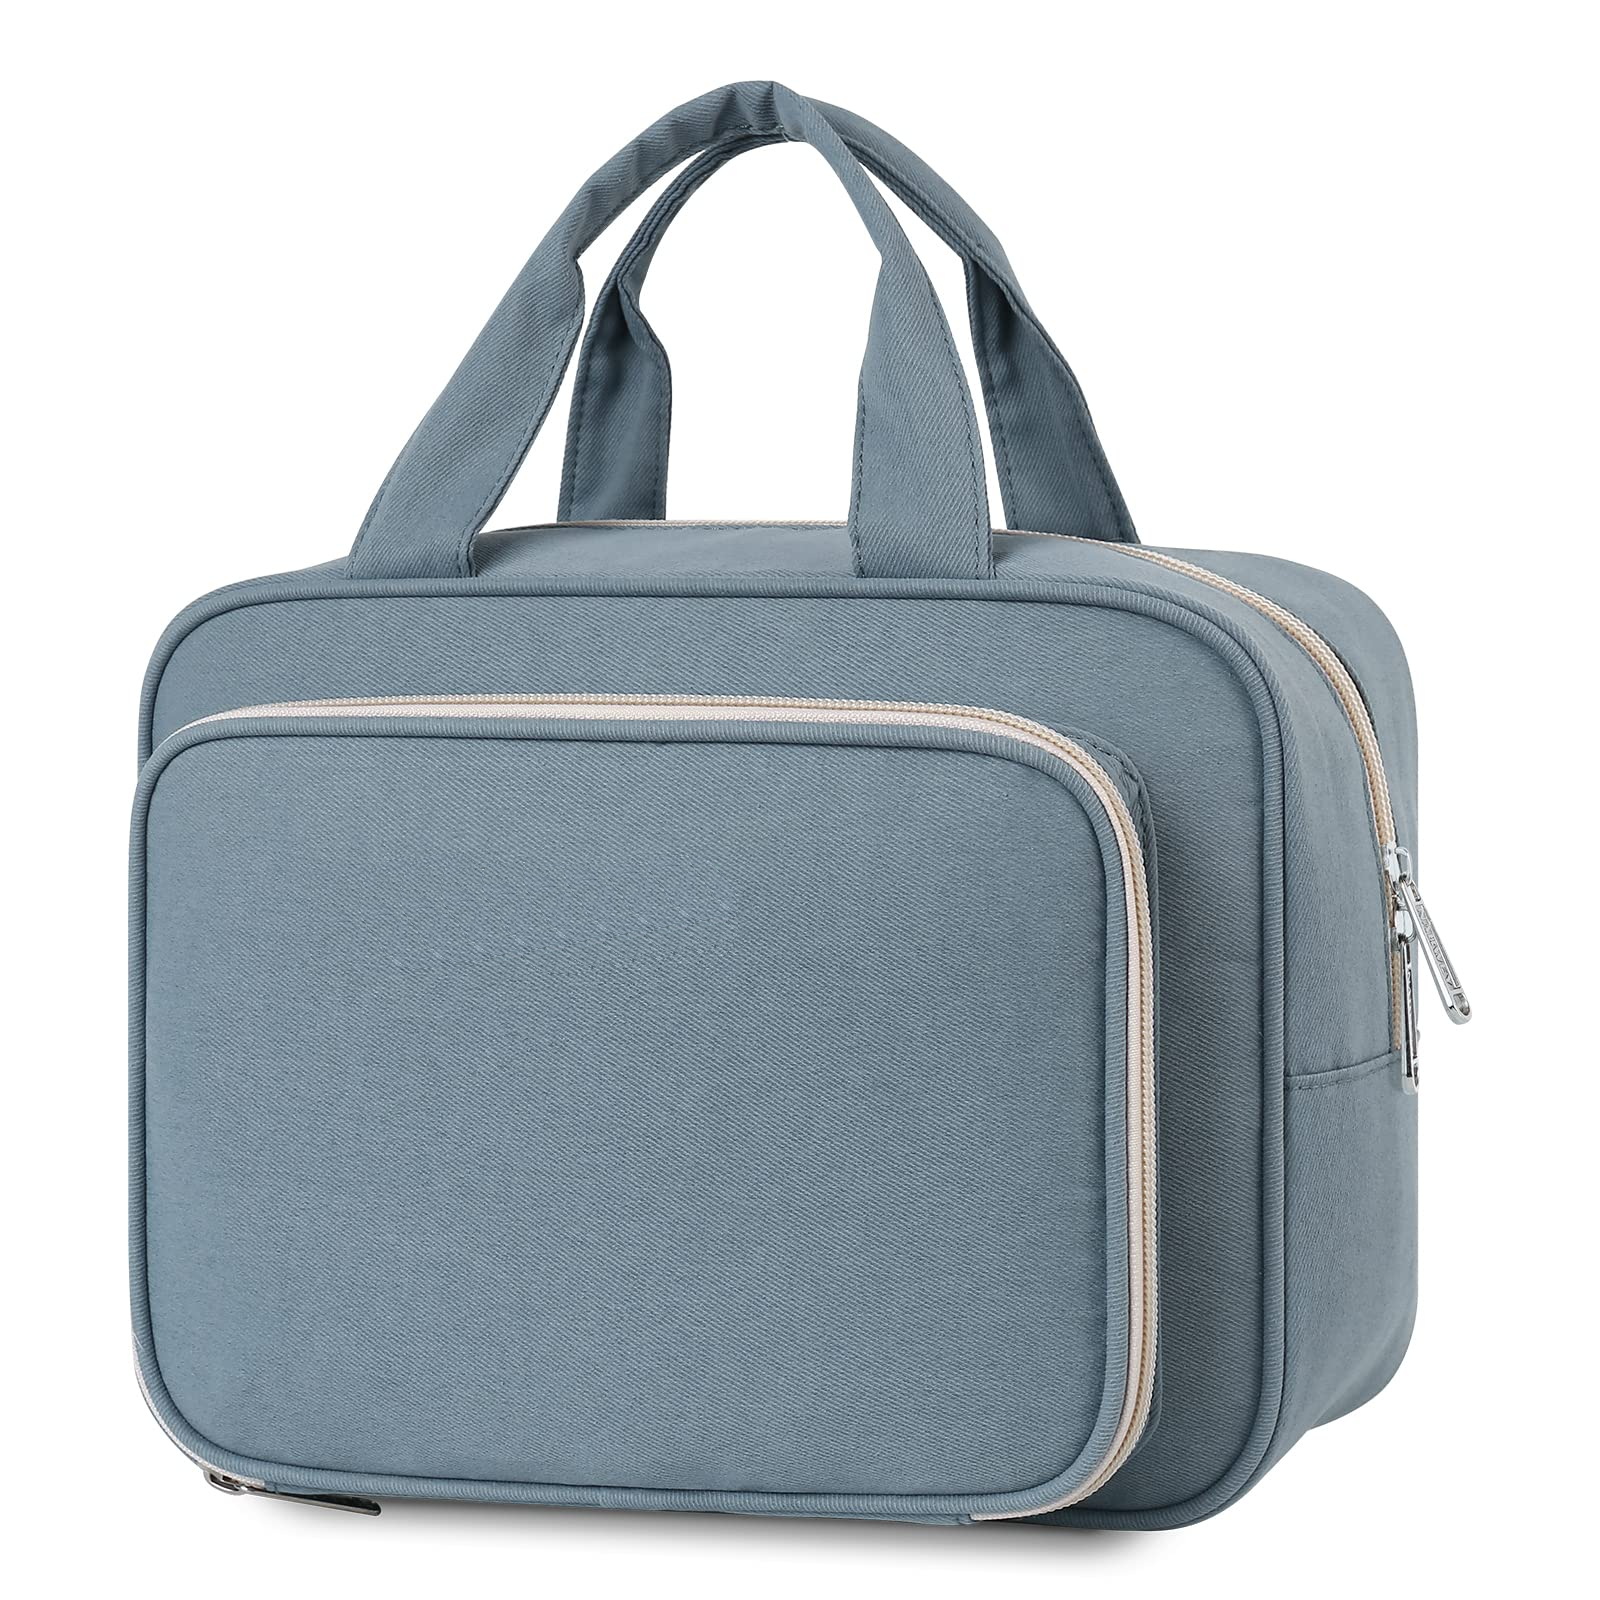 Large Capacity Toiletry Organizer Bag Product Details